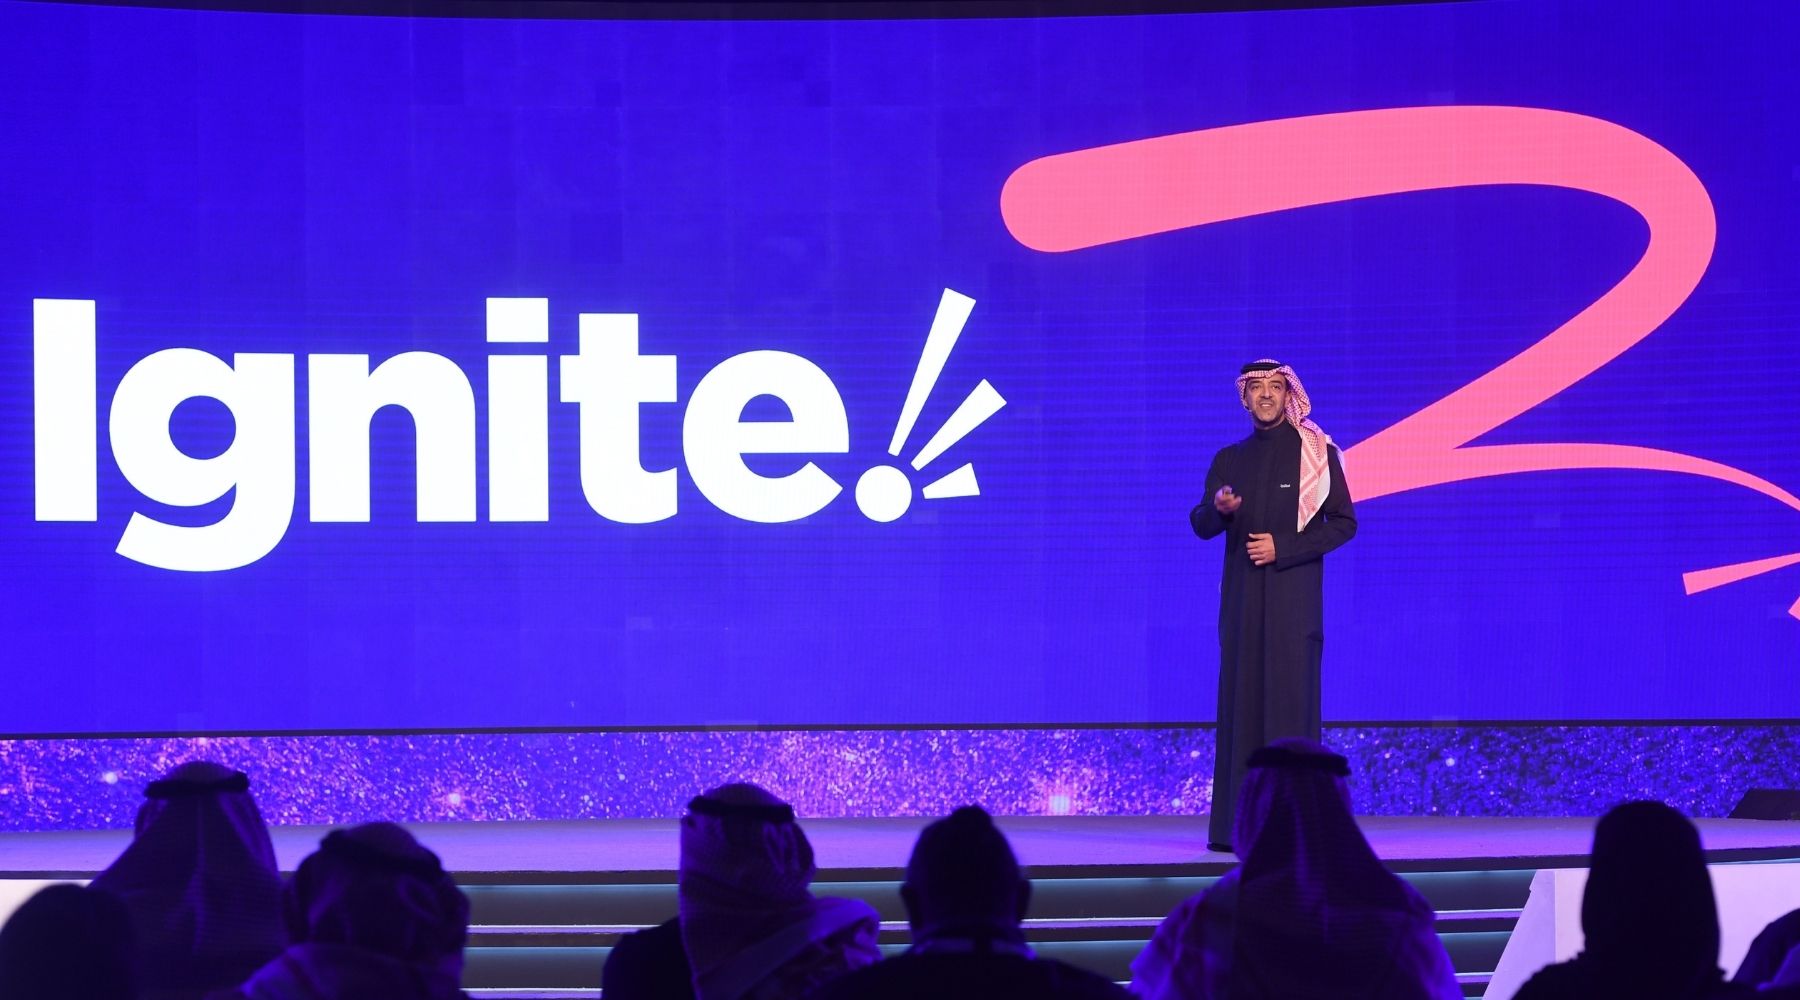 ‘Ignite’ to Uplift Digital Content Creation and Media Production in KSA